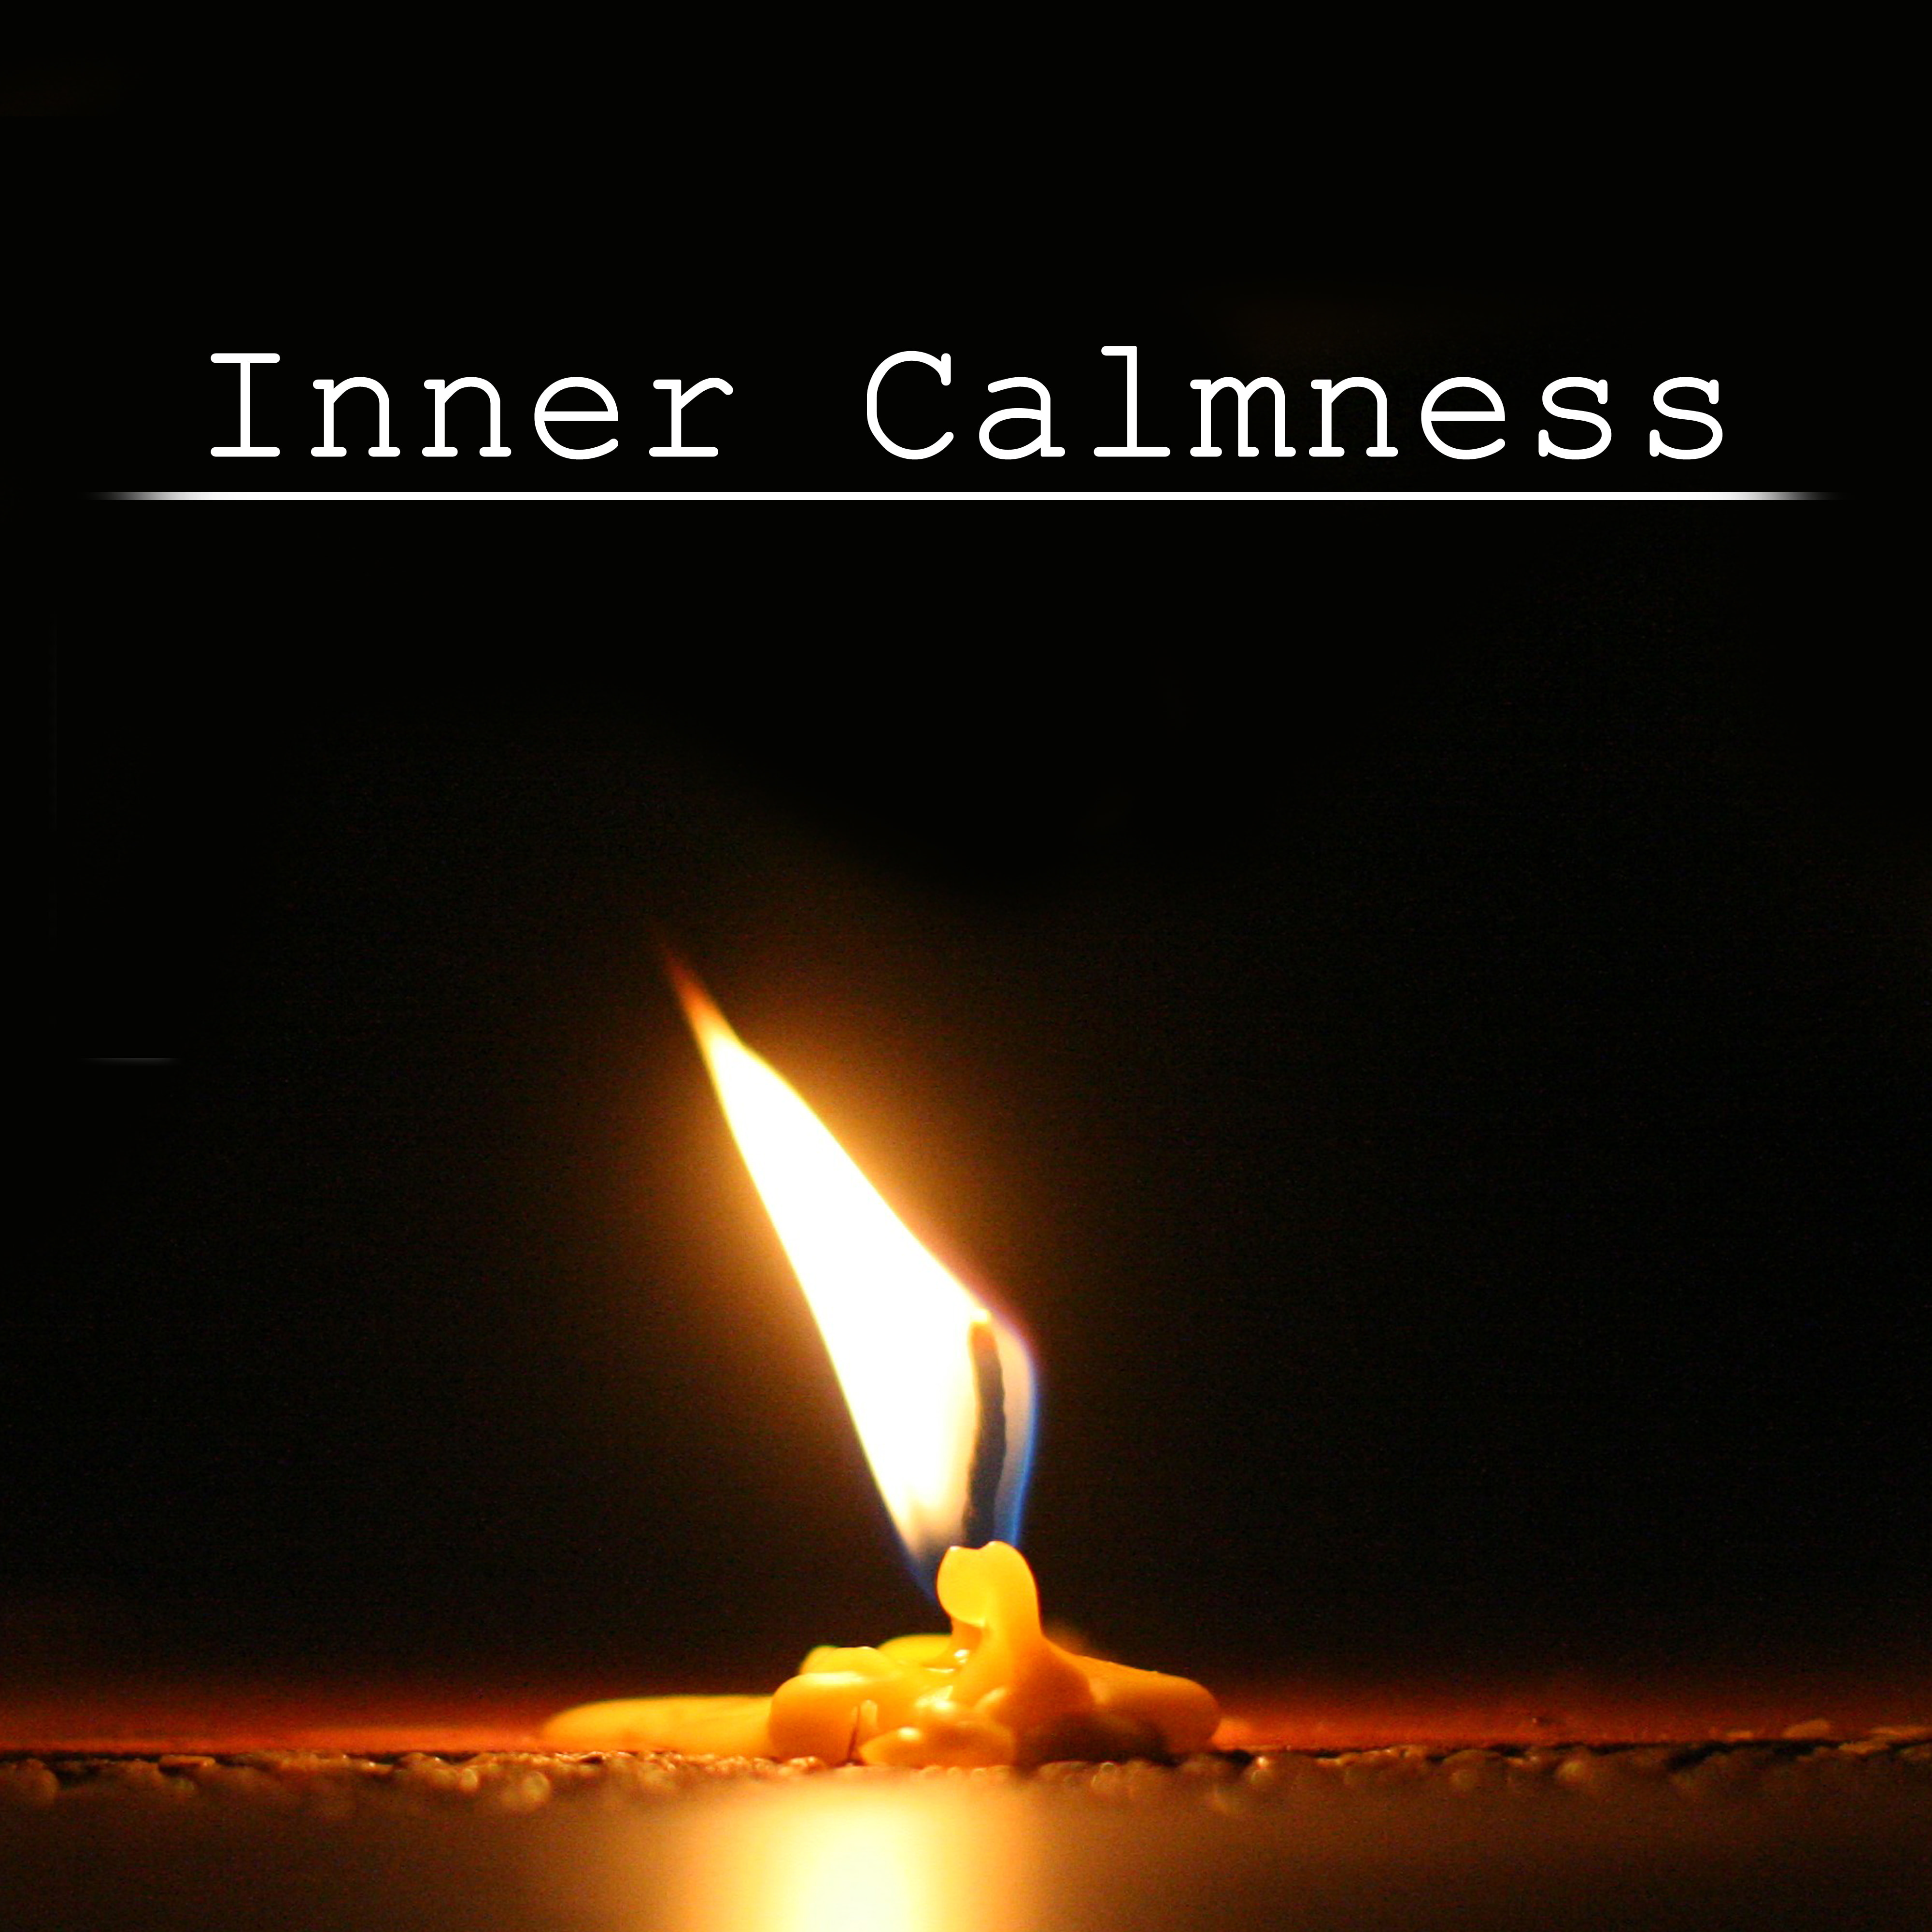 Inner Calmness  Easy Sleep Music, Bedtime, Soothing Nature Sounds for Relaxation, Pure Sleep, Therapy Sounds, Soft Lullabies, Music at Goodnight